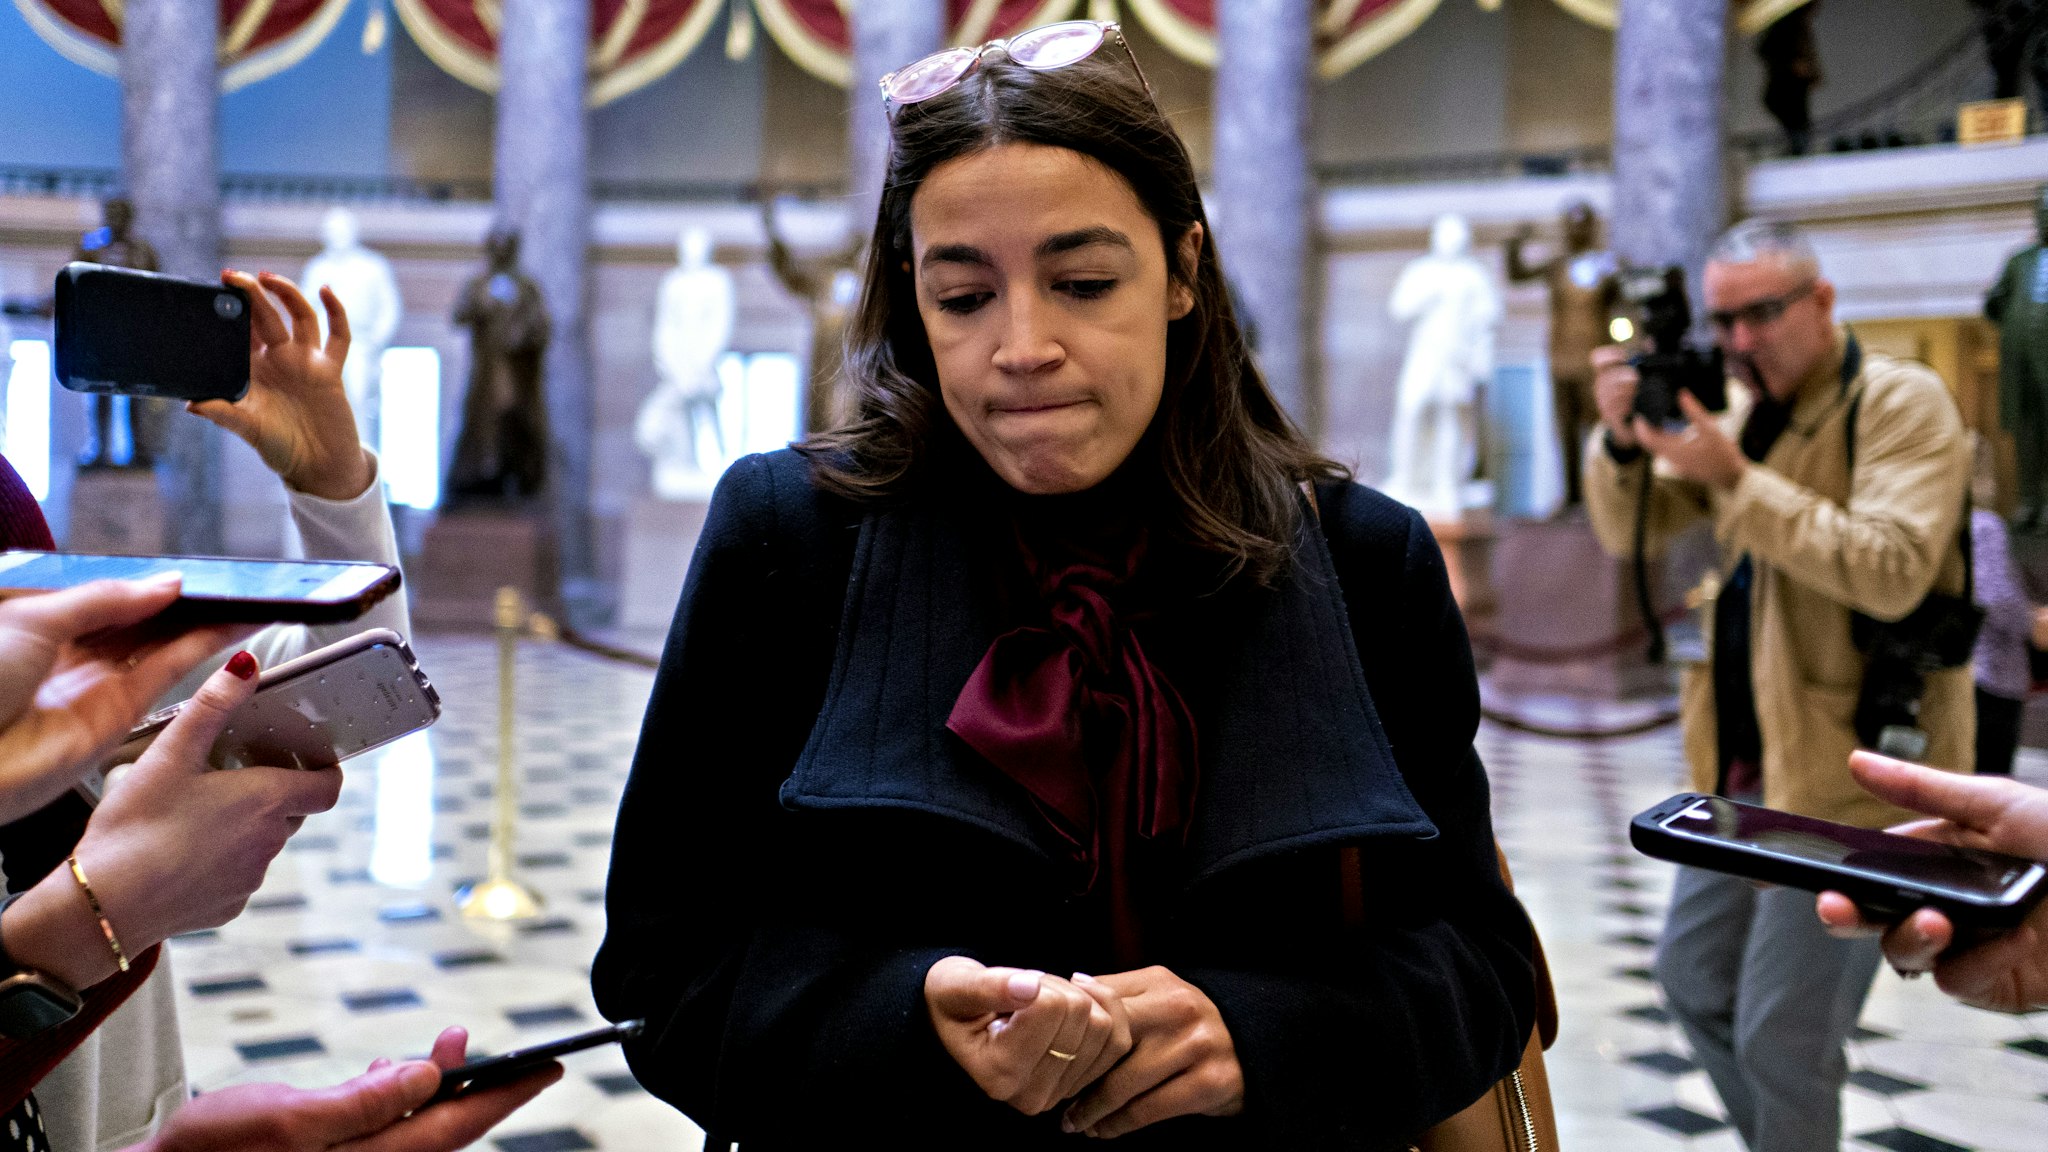 Representative Alexandria Ocasio-Cortez, a Democrat from New York, pauses while speaking to members of the media in Statuary Hall of the U.S. Capitol in Washington, D.C., U.S., on Wednesday, Dec. 18, 2019. The full House is set to debate and vote Wednesday on two impeachment articles accusing President Donald Trump of abusing his power and obstructing Congress's investigation of his actions toward Ukraine.